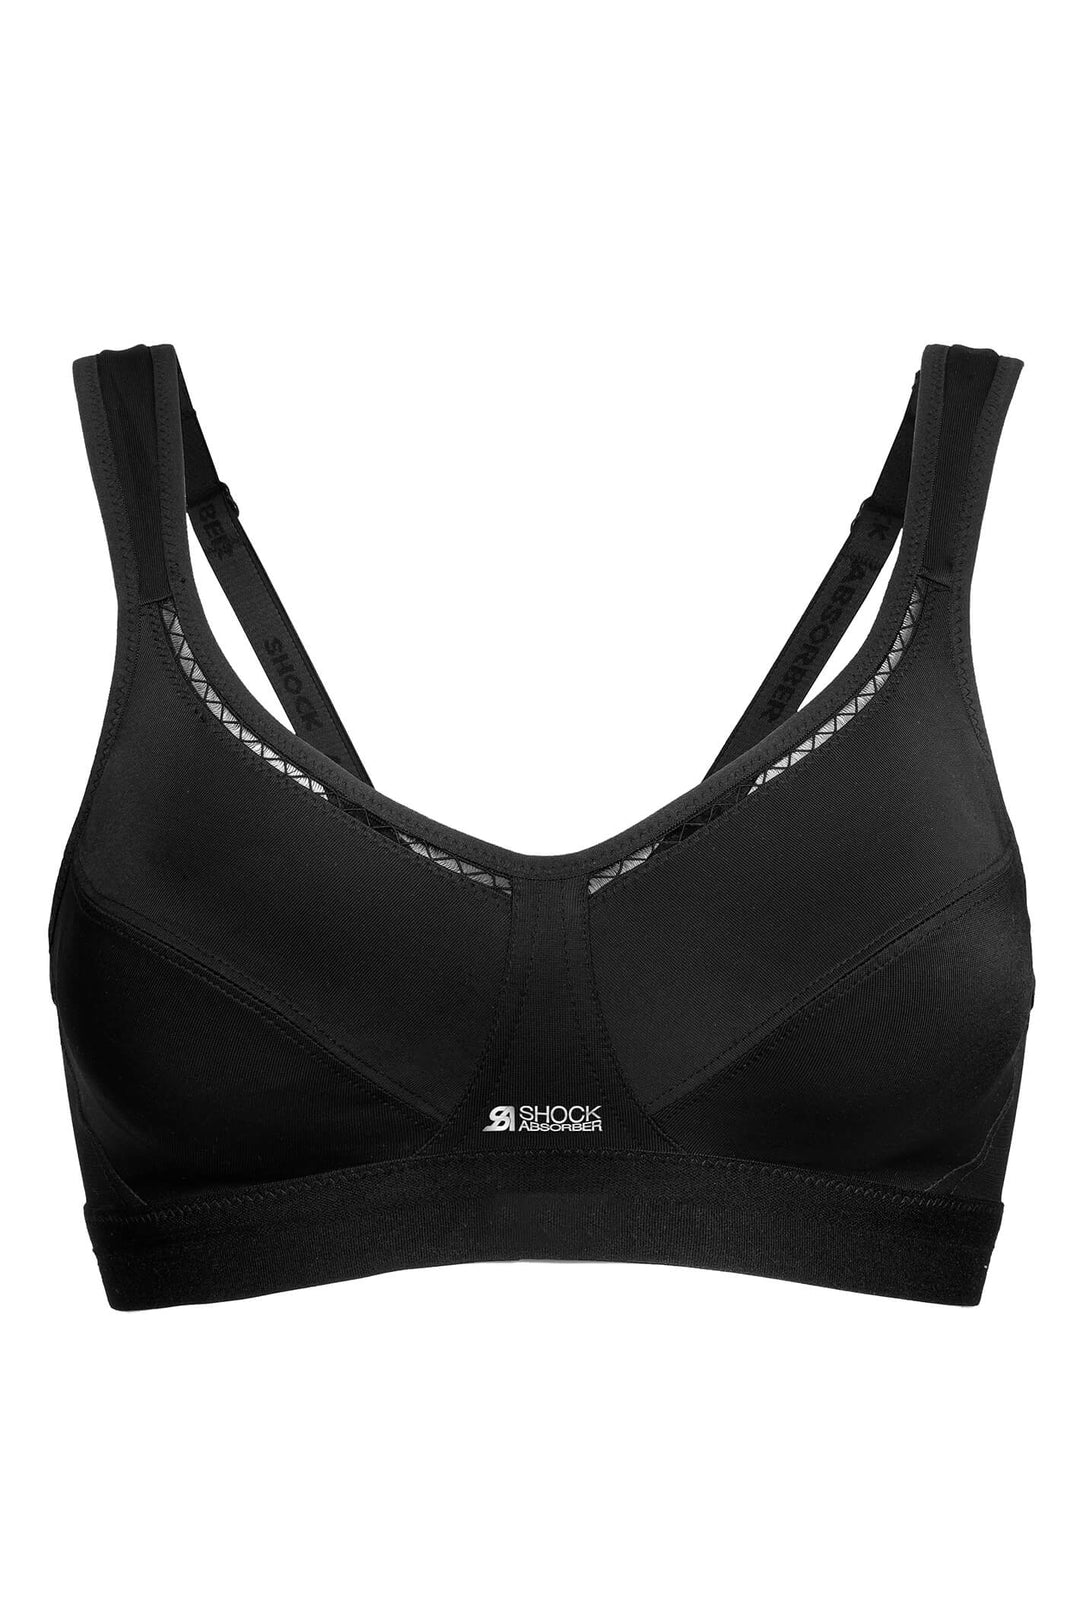 Shock Absorber SN102 Black Active Classic Support Sports Bra - Shirley Allum Boutique